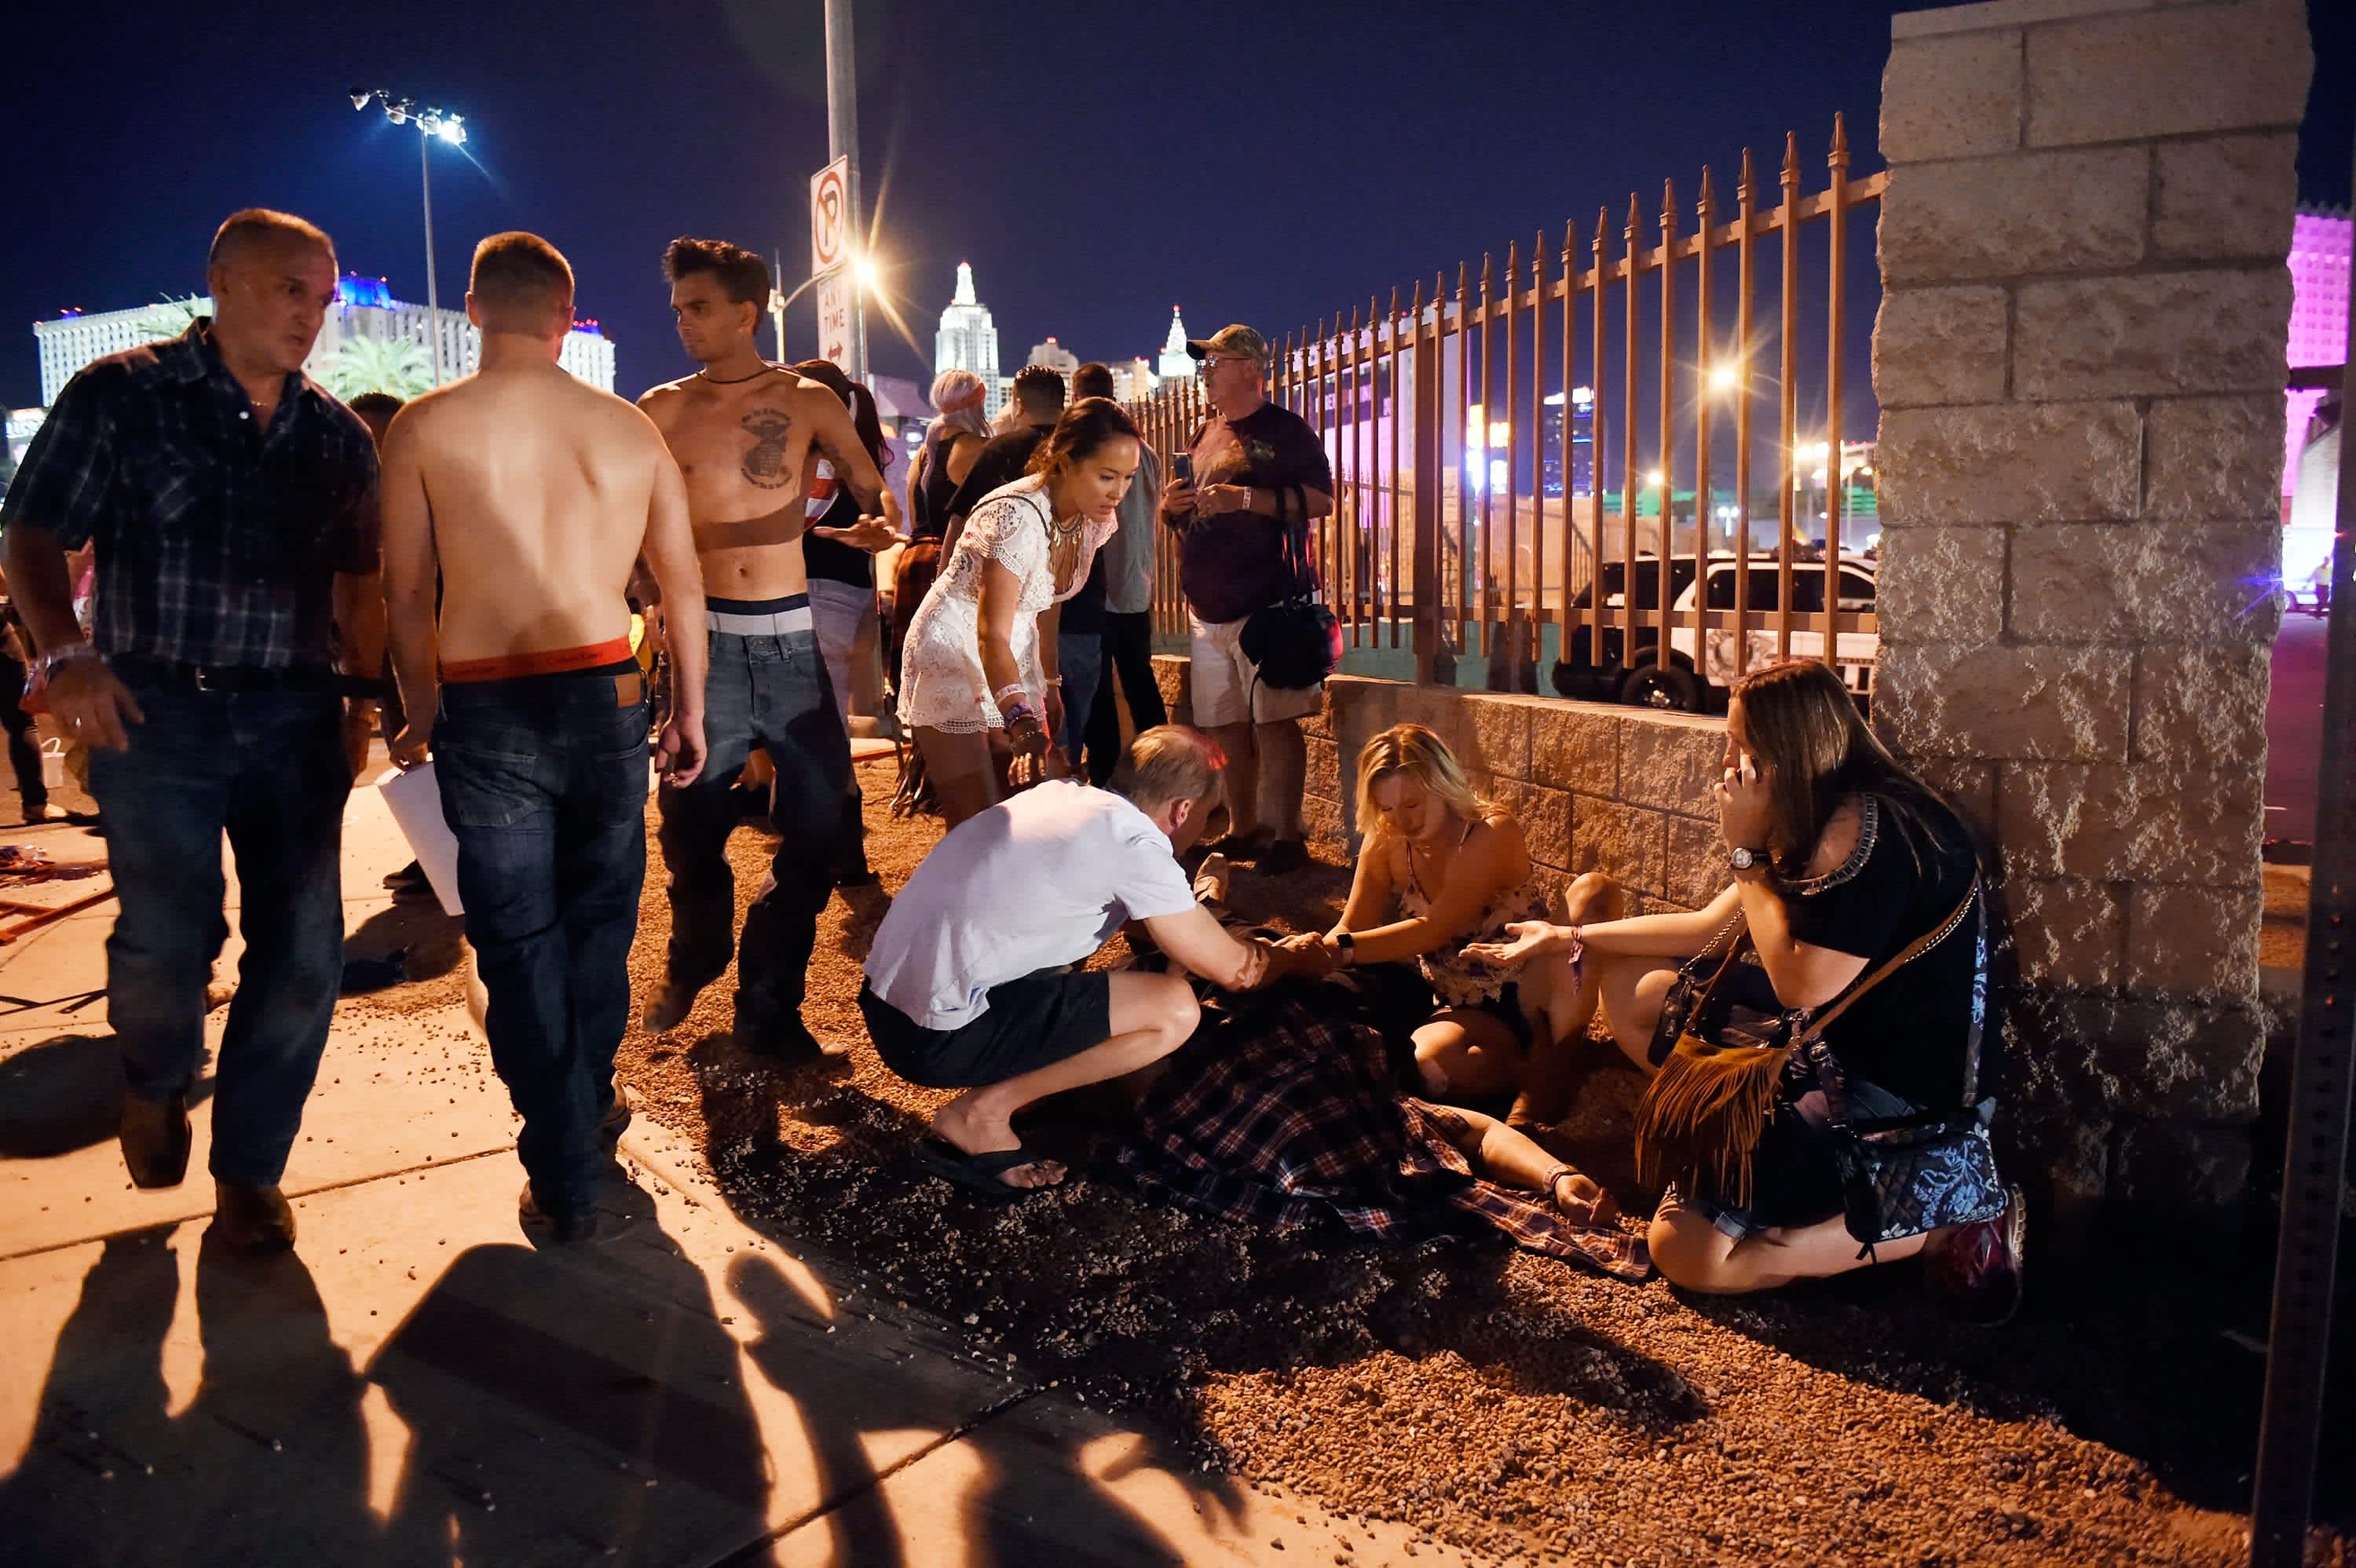 People tend to the wounded outside the scene of a mass shooting at a music festival in Las Vegas (DAVID BECKER / GETTY IMAGES / AFP)